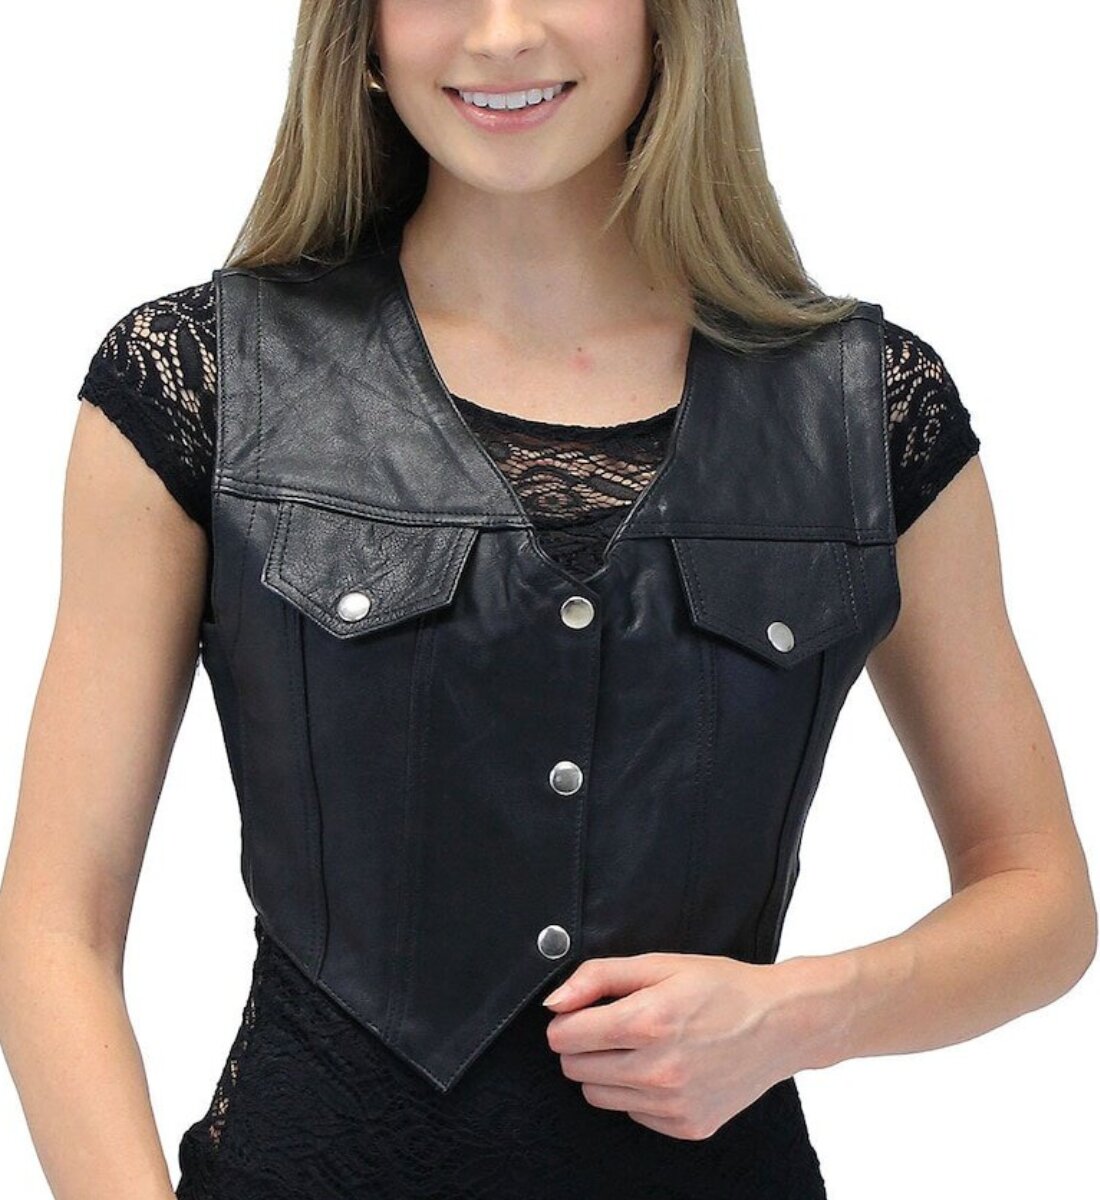 Edgy Snap-Front Crop Vest with a Rocker Vibe